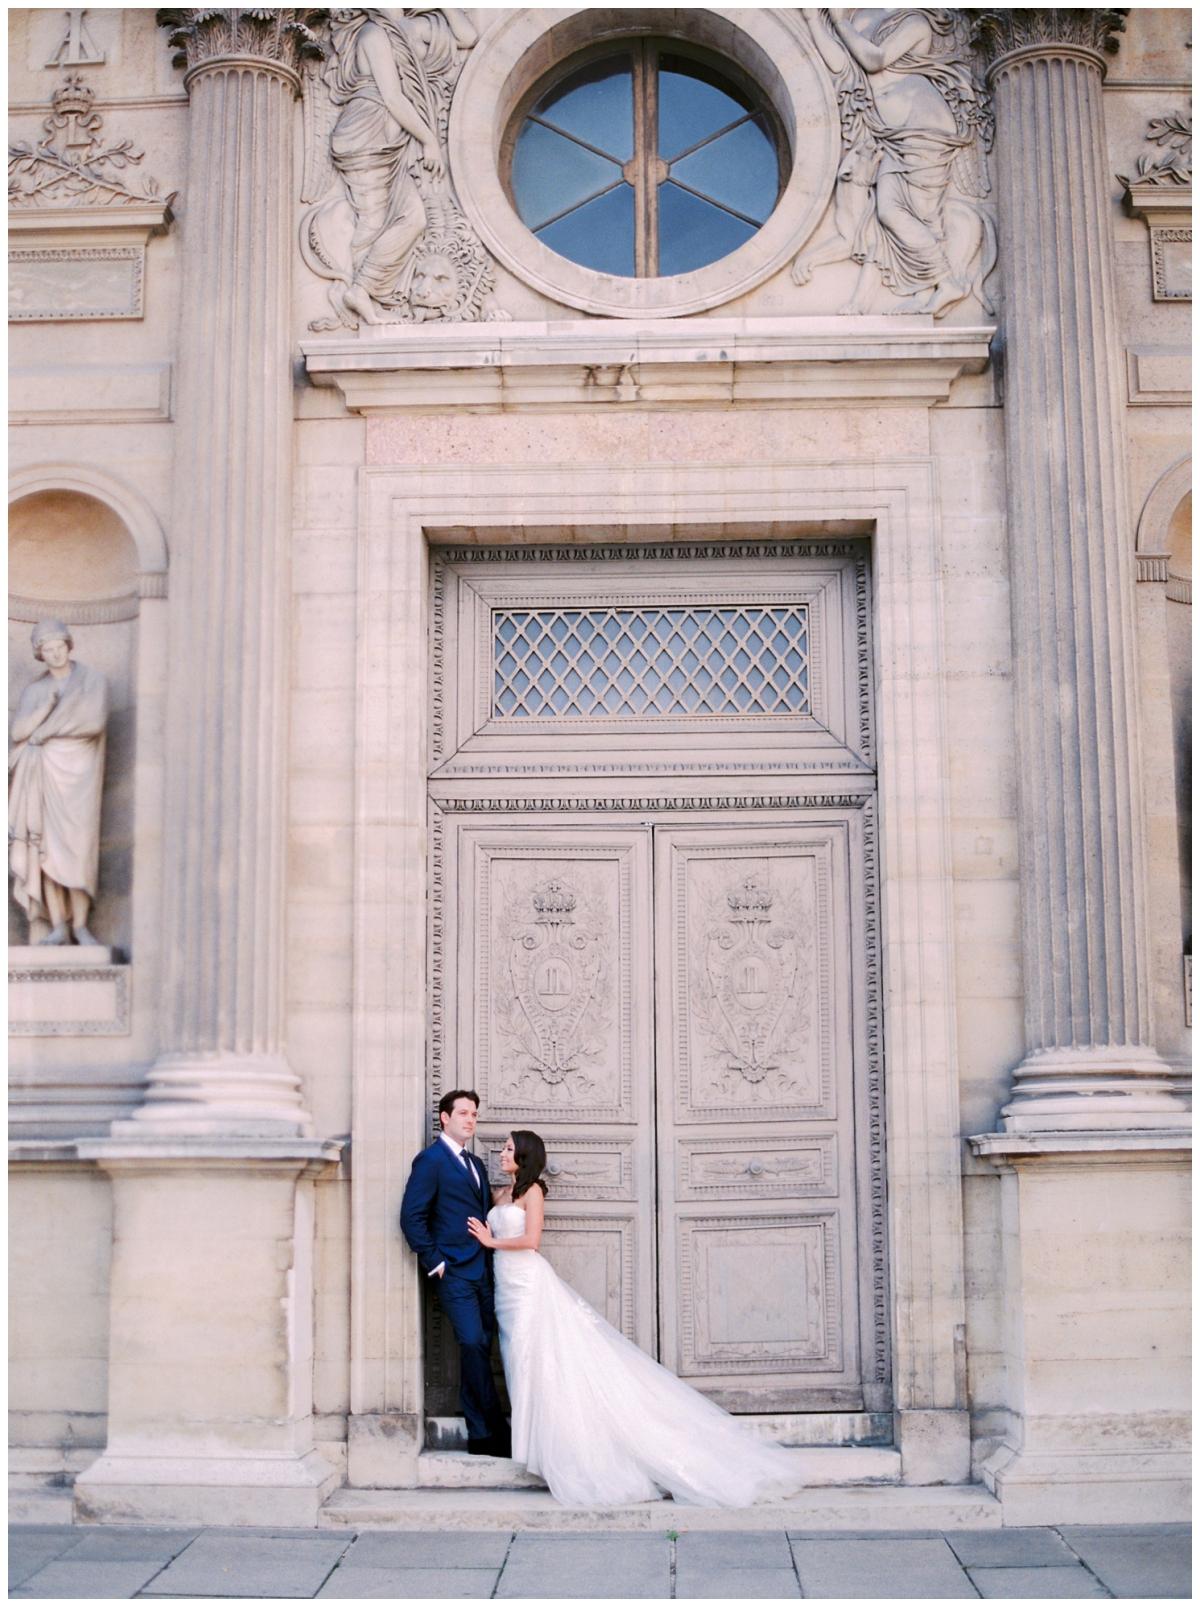 Wedding at the Musee Rodin in Paris - Audrey